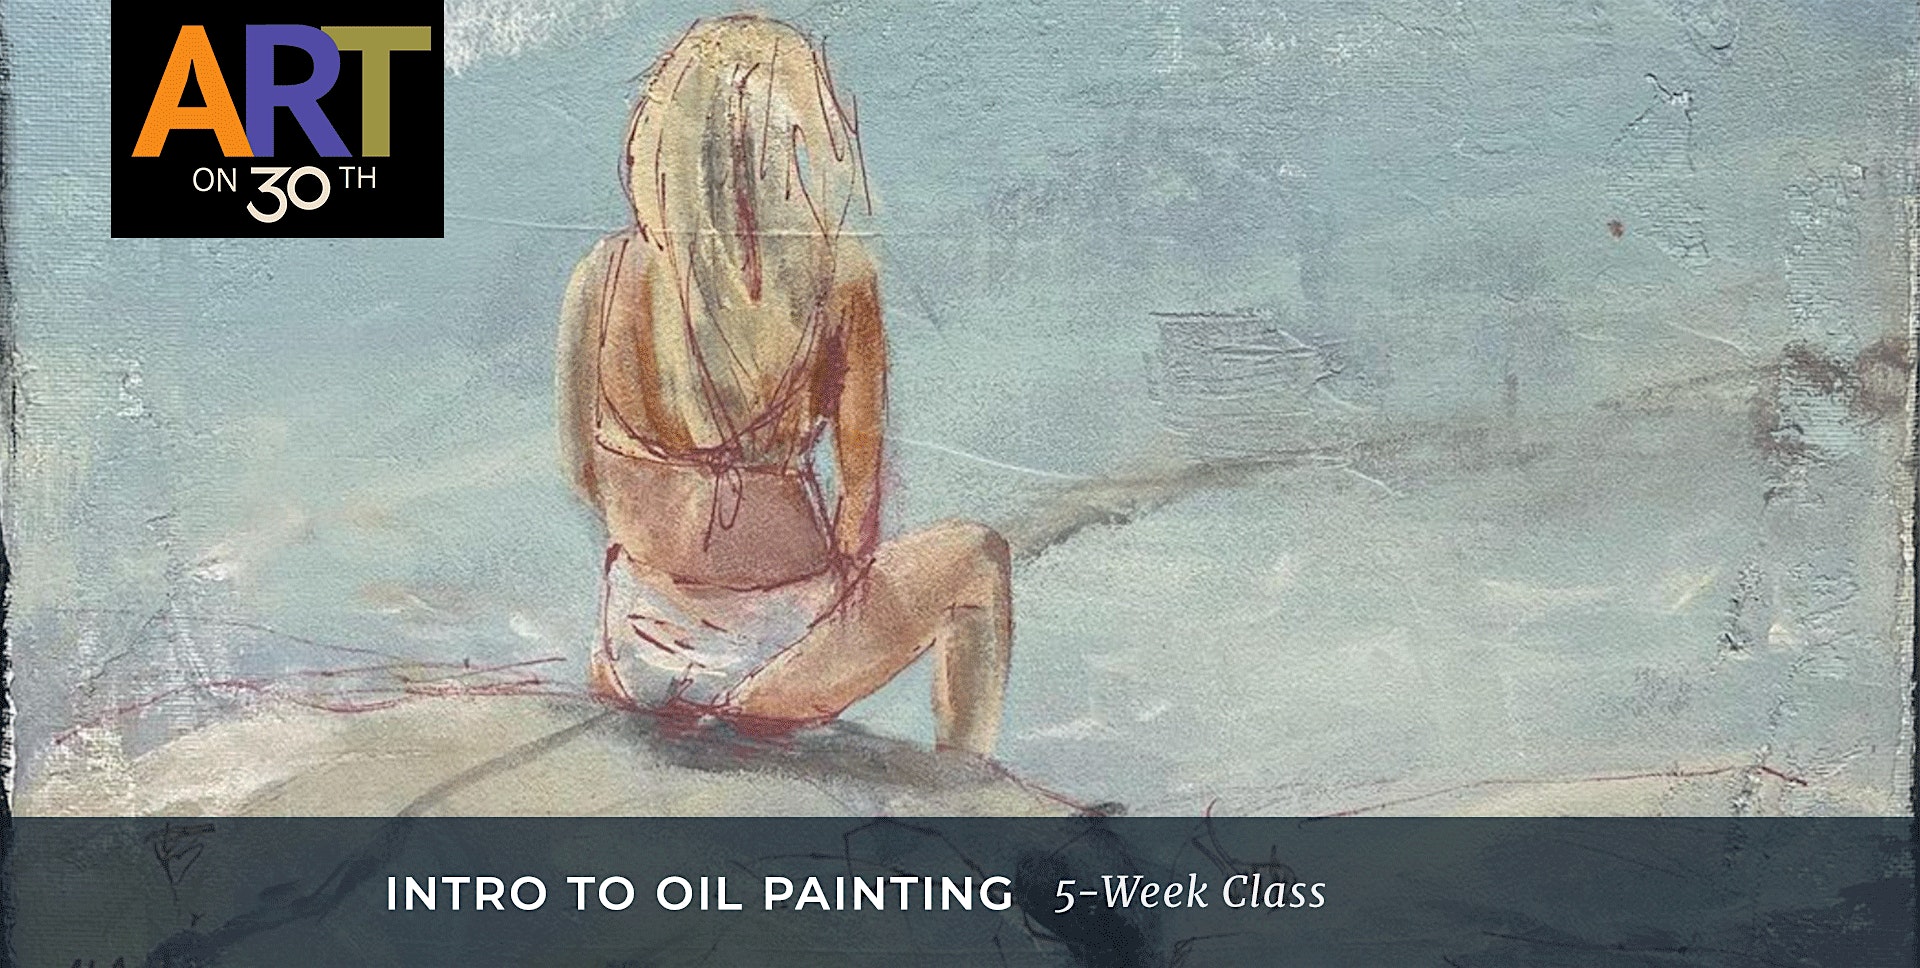 MON PM - Intro to Oil Painting with Tracie Fearing